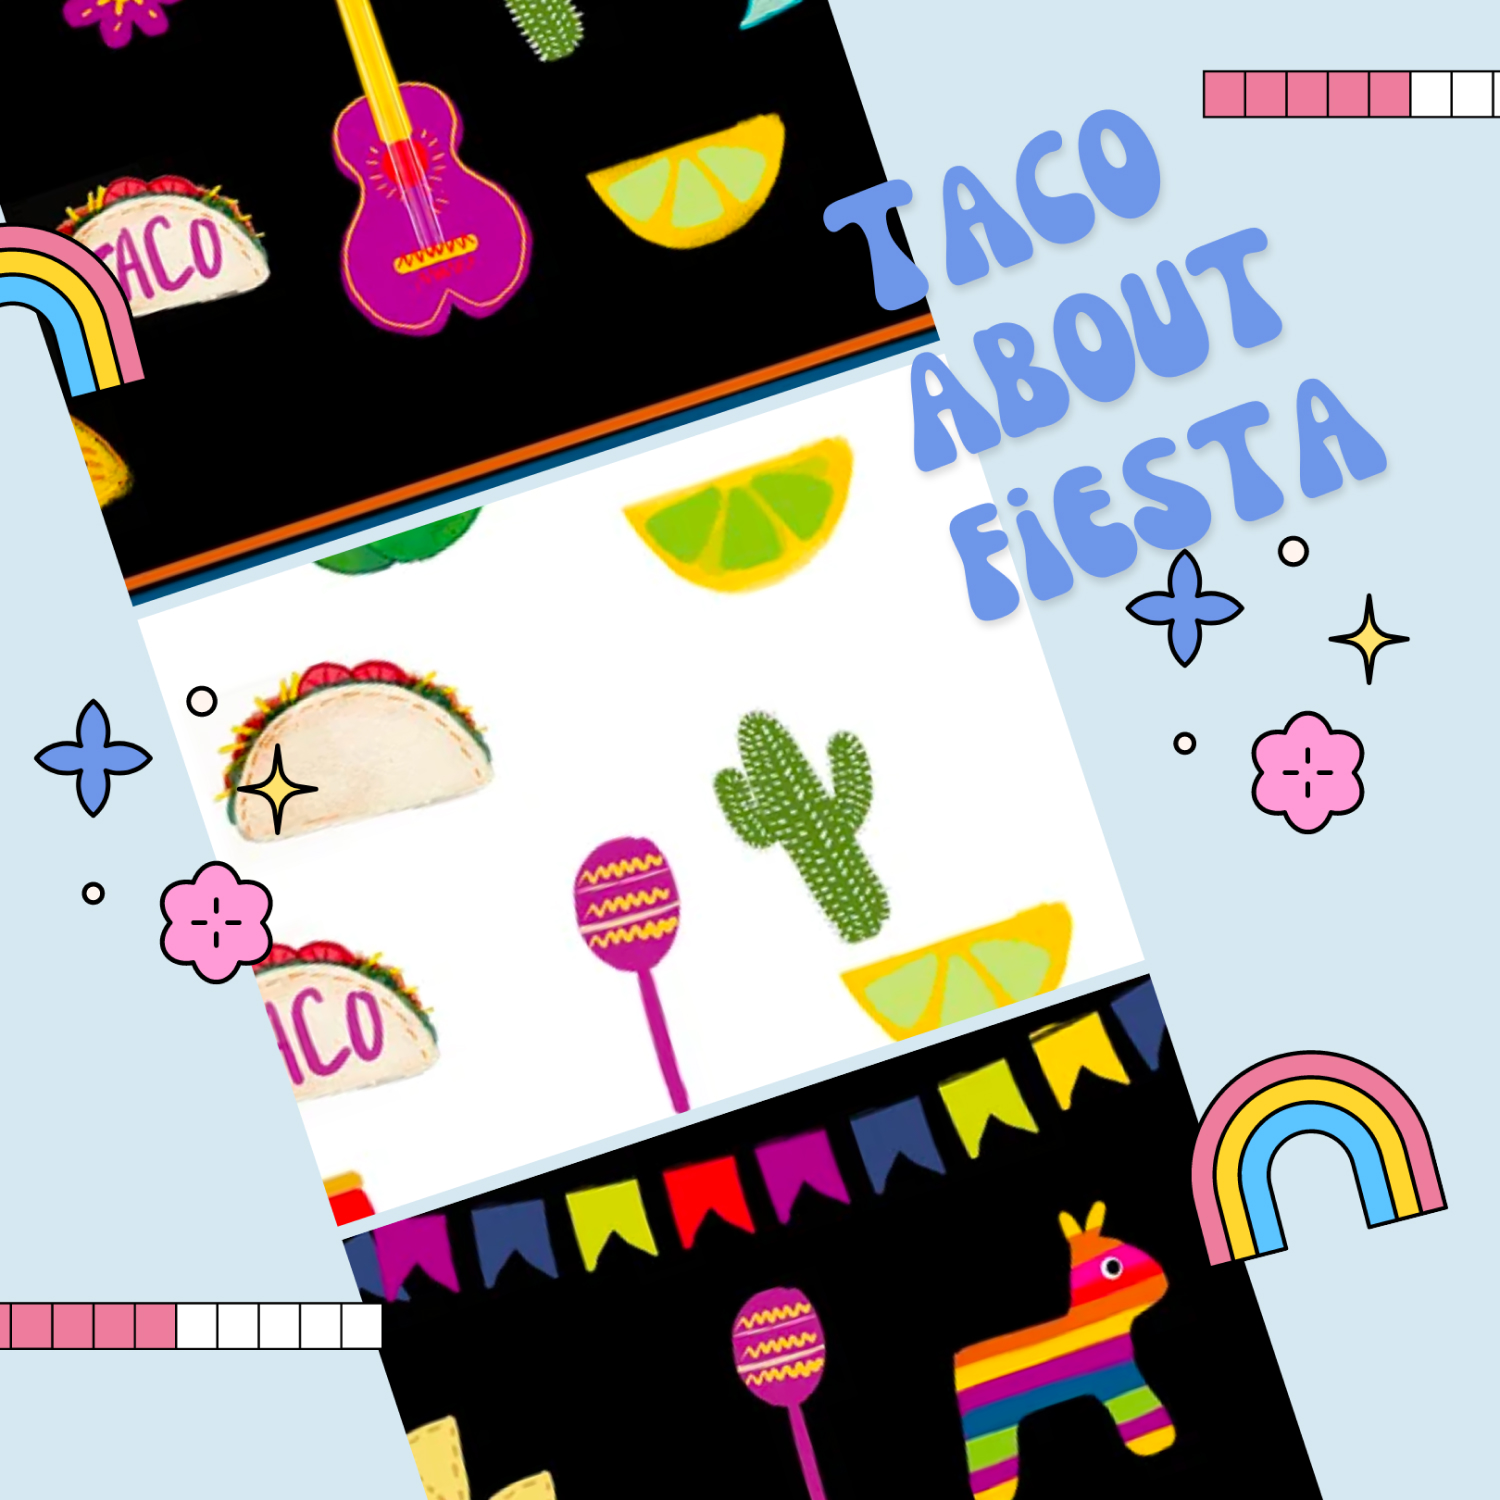 Taco about fiesta clipart.